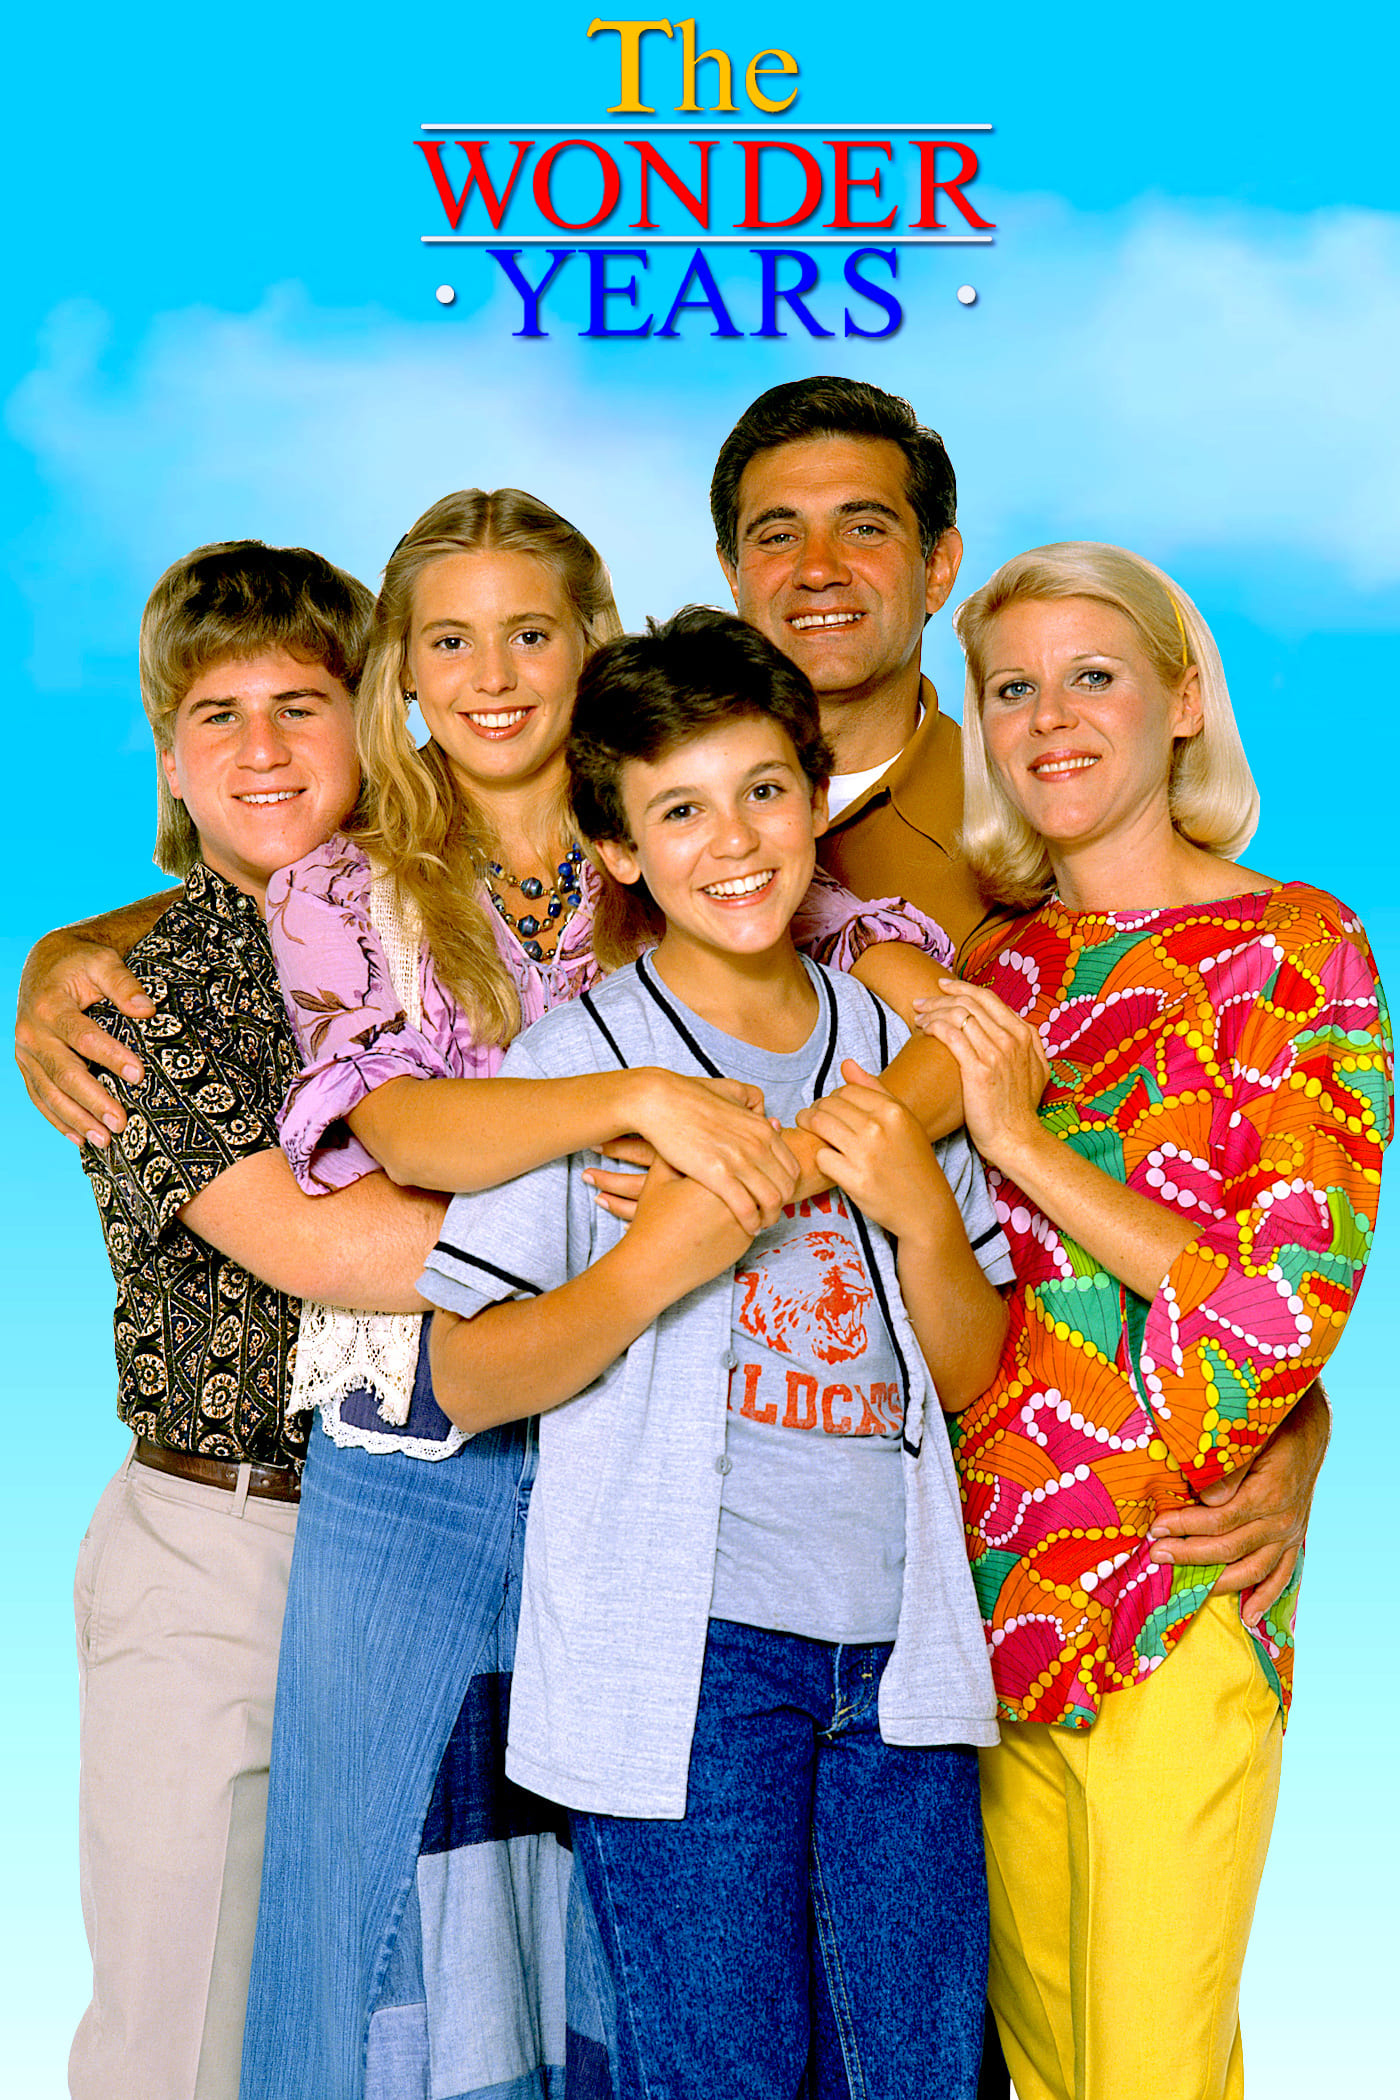 The Wonder Years TV Shows About Growing Up